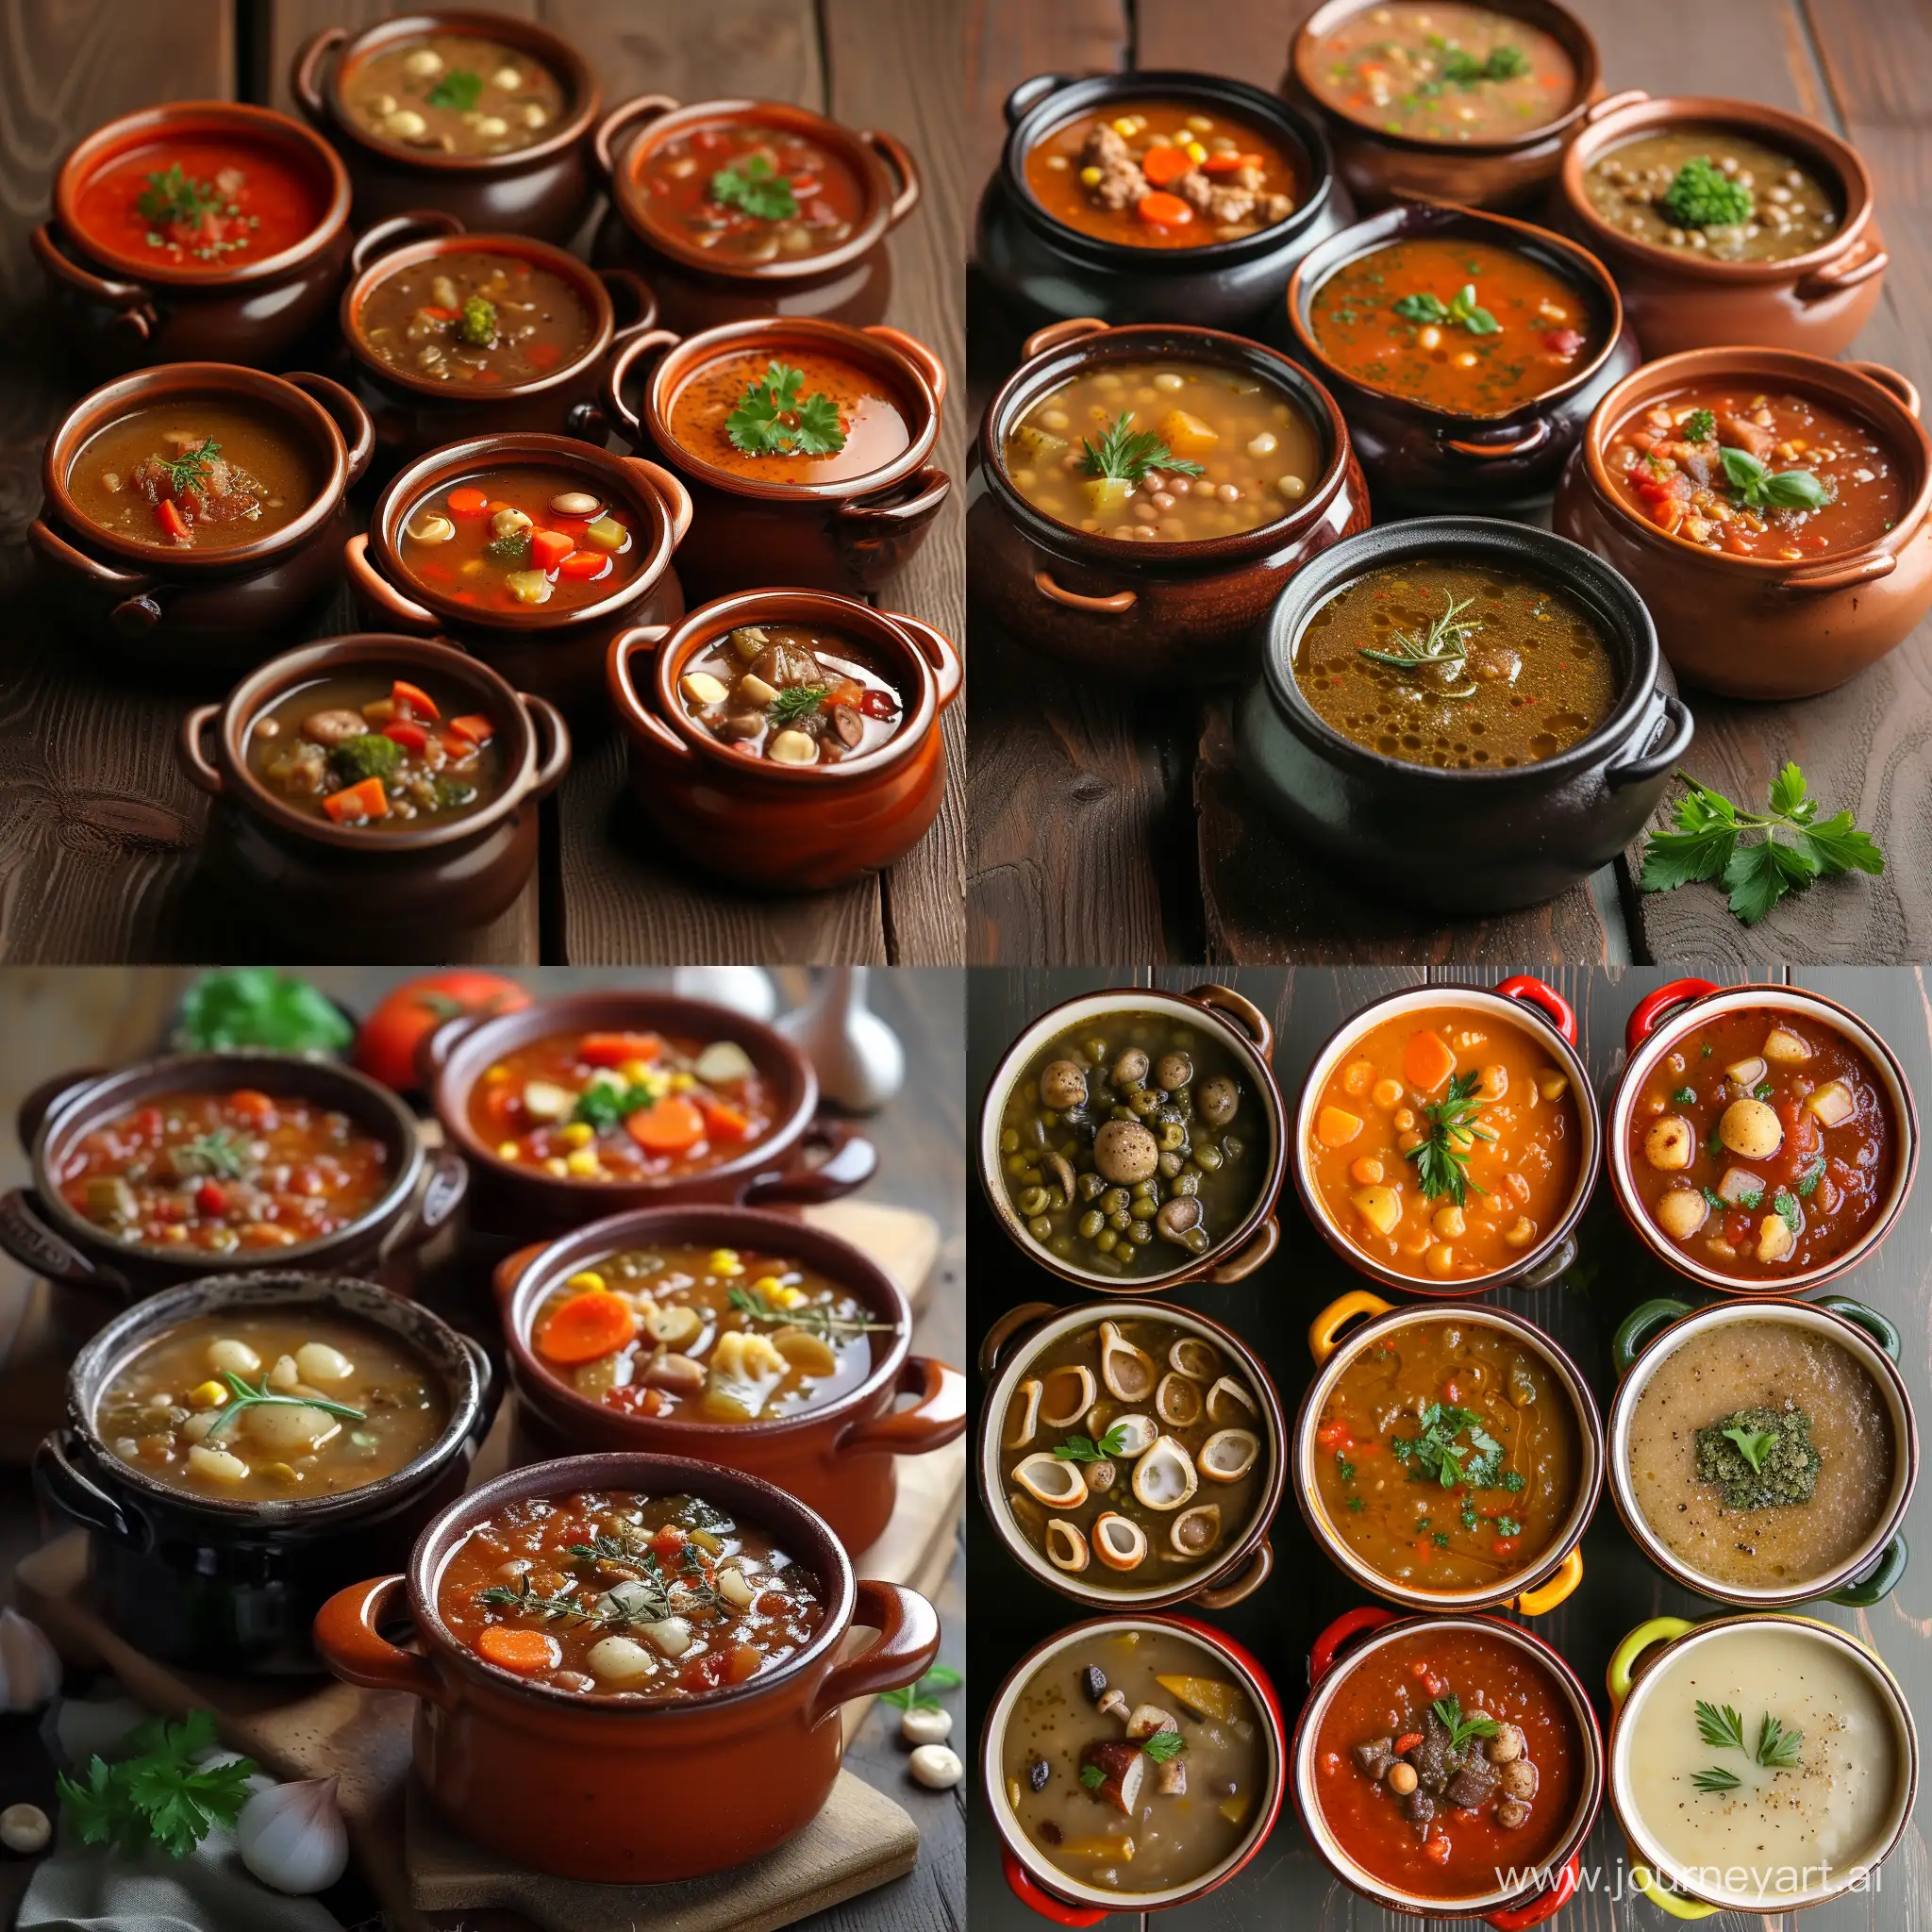 Homemade-Soup-in-Rustic-Pots-Realistic-Culinary-Delight-Photo